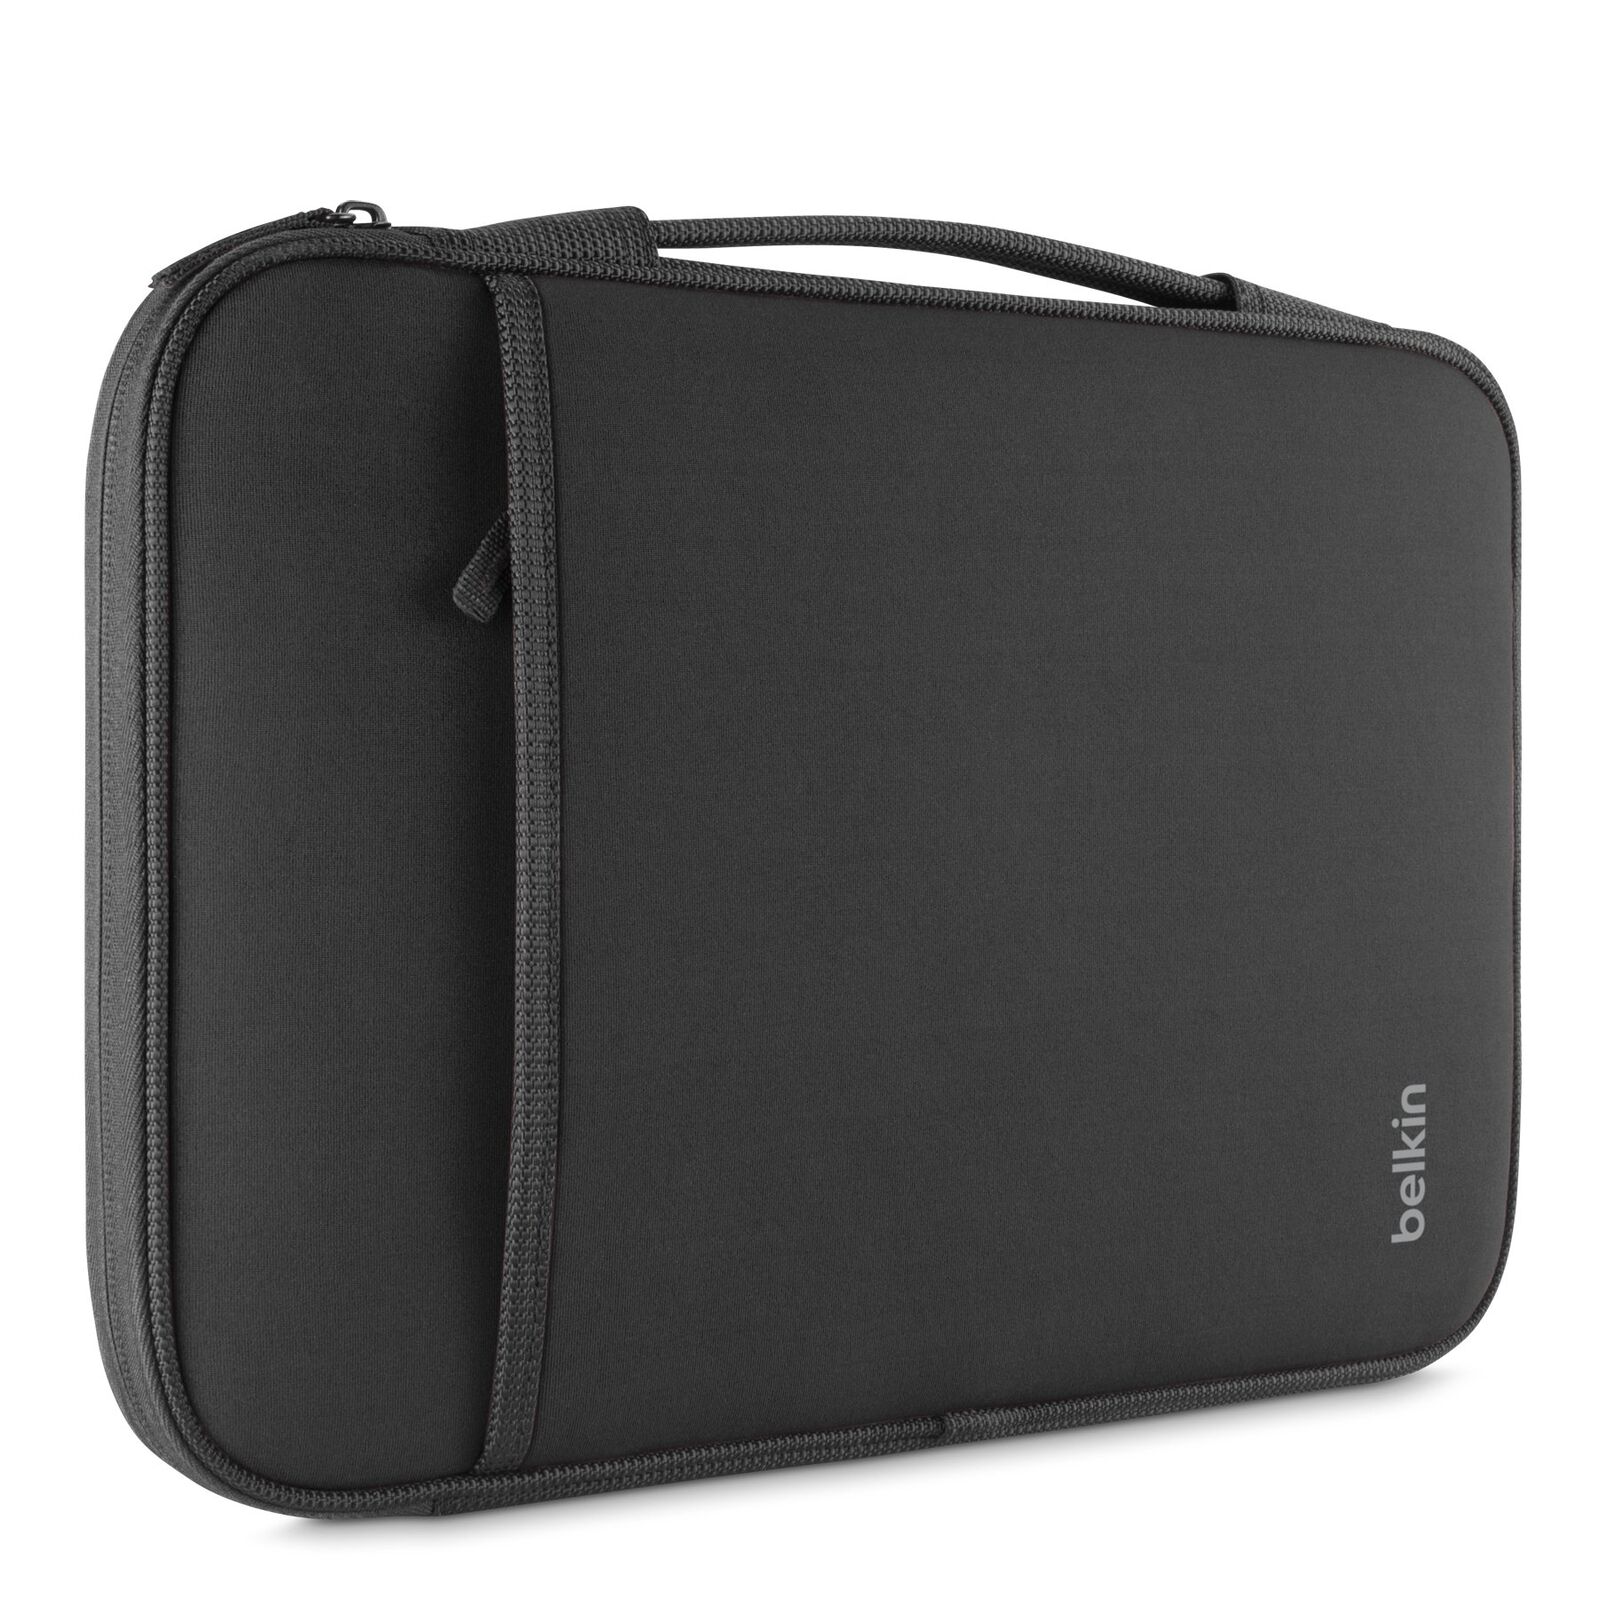 Belkin Slim Protective Sleeve with Carry Handle and Zipped Storage for Chromeboo